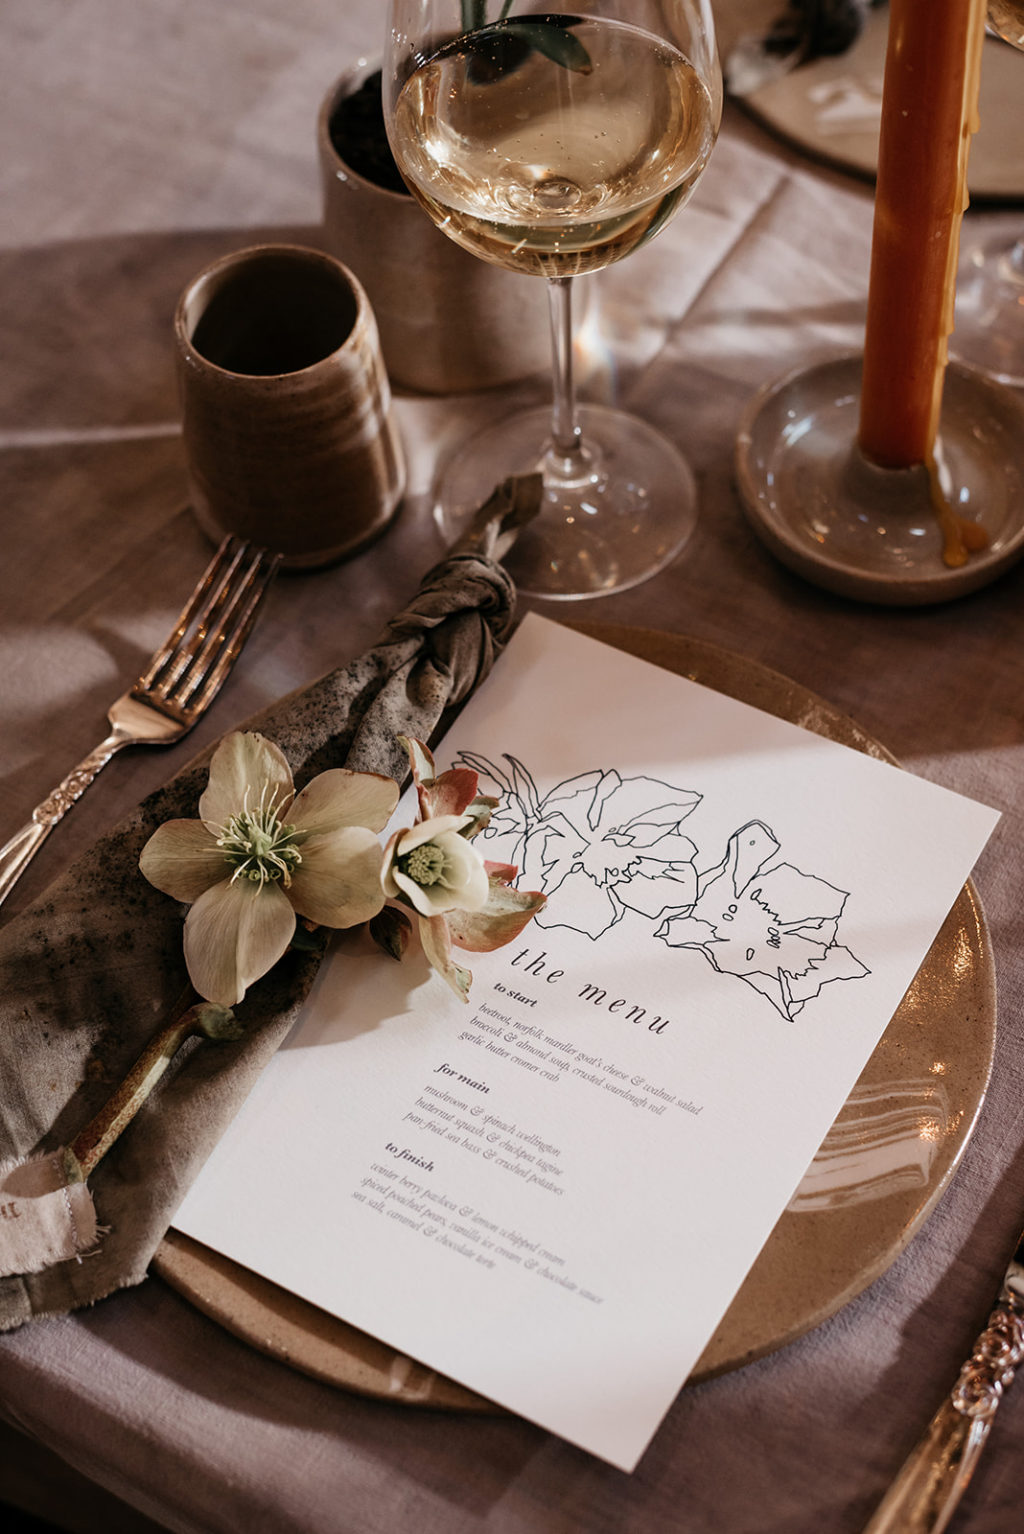 Nature Inspired Ethical Wedding Inspiration at Langley Abbey, Norwich